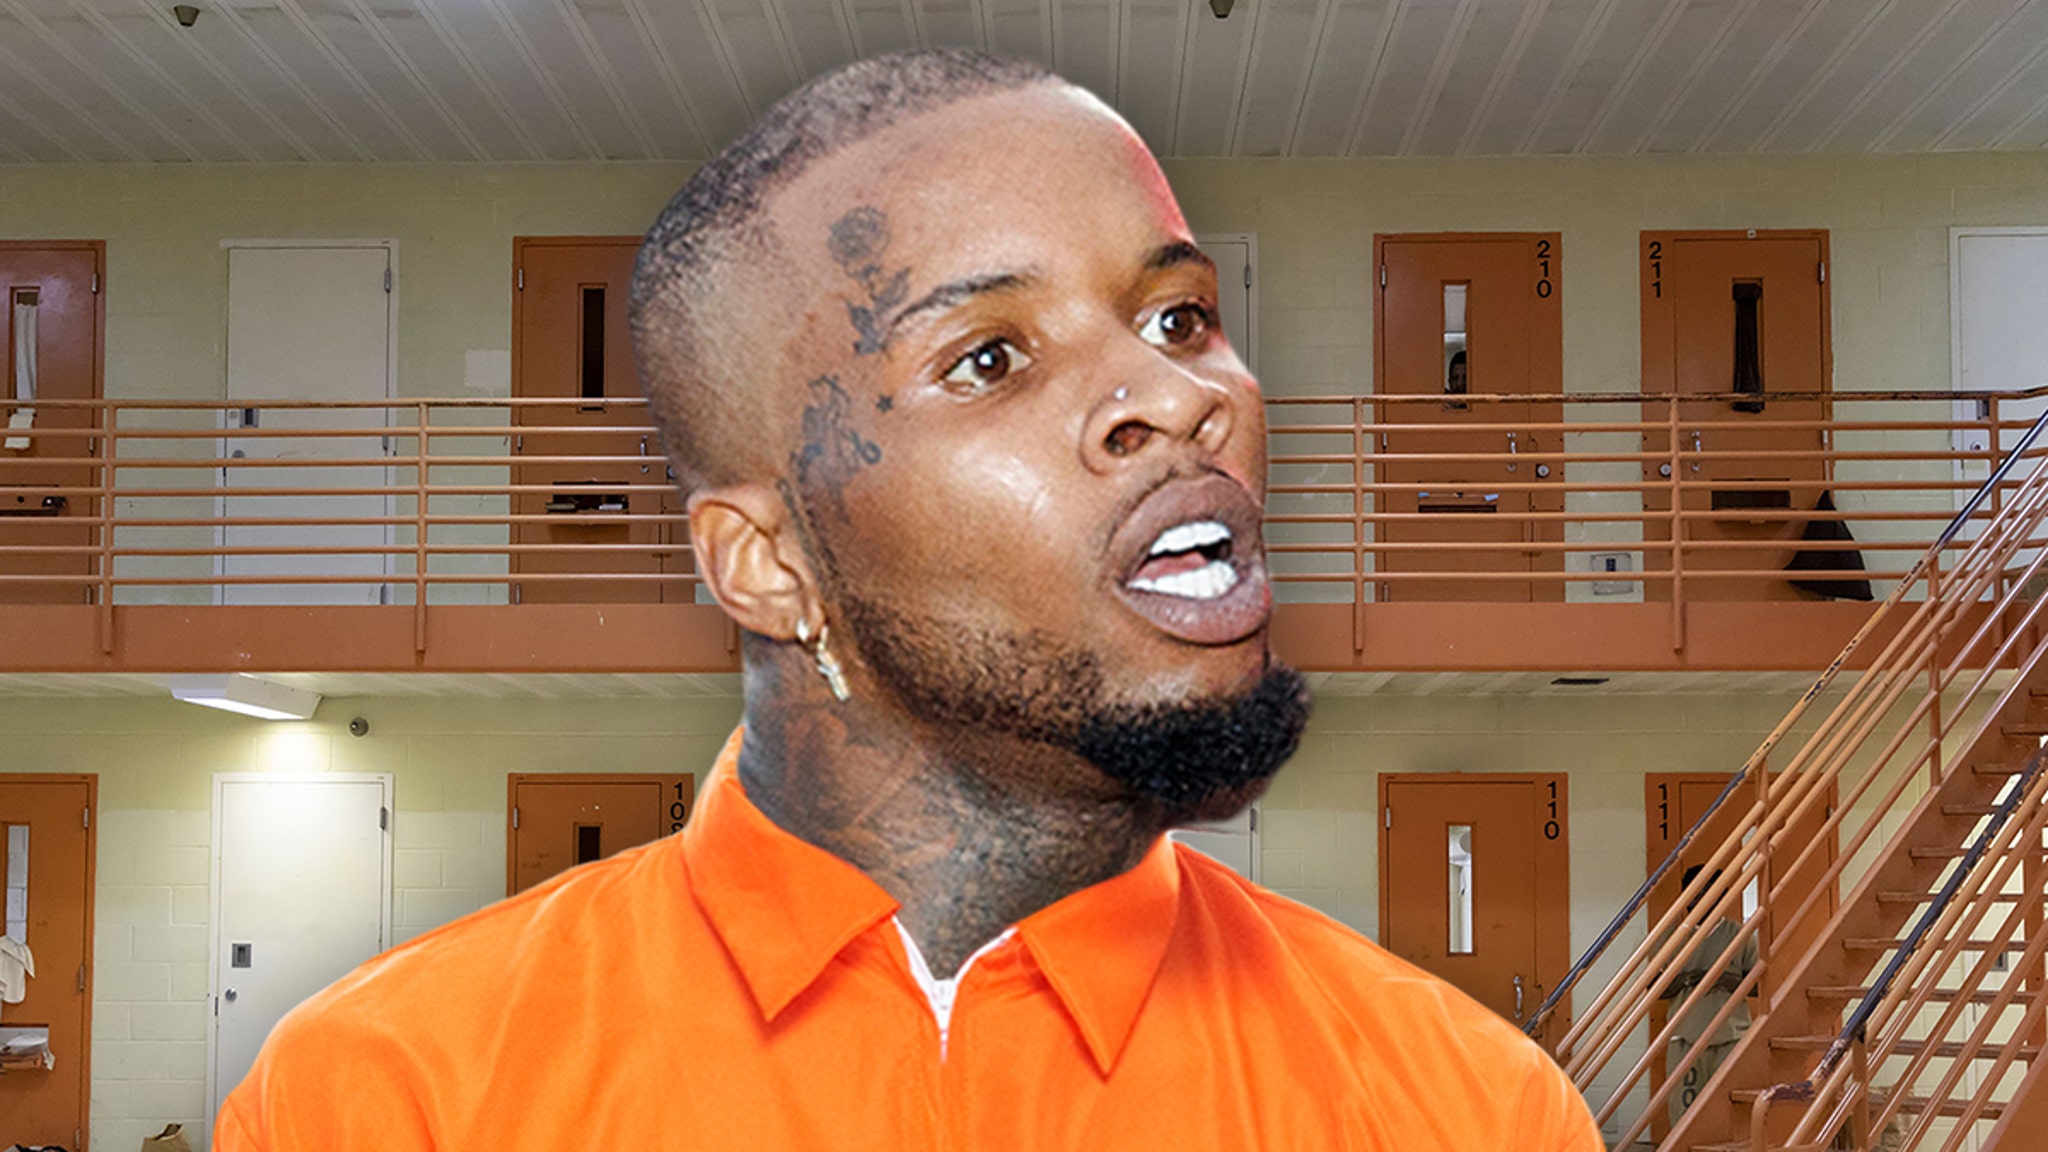 Tory Lanez Prison Life Behind Bars, All Alone Due To High Profile #ToryLanez